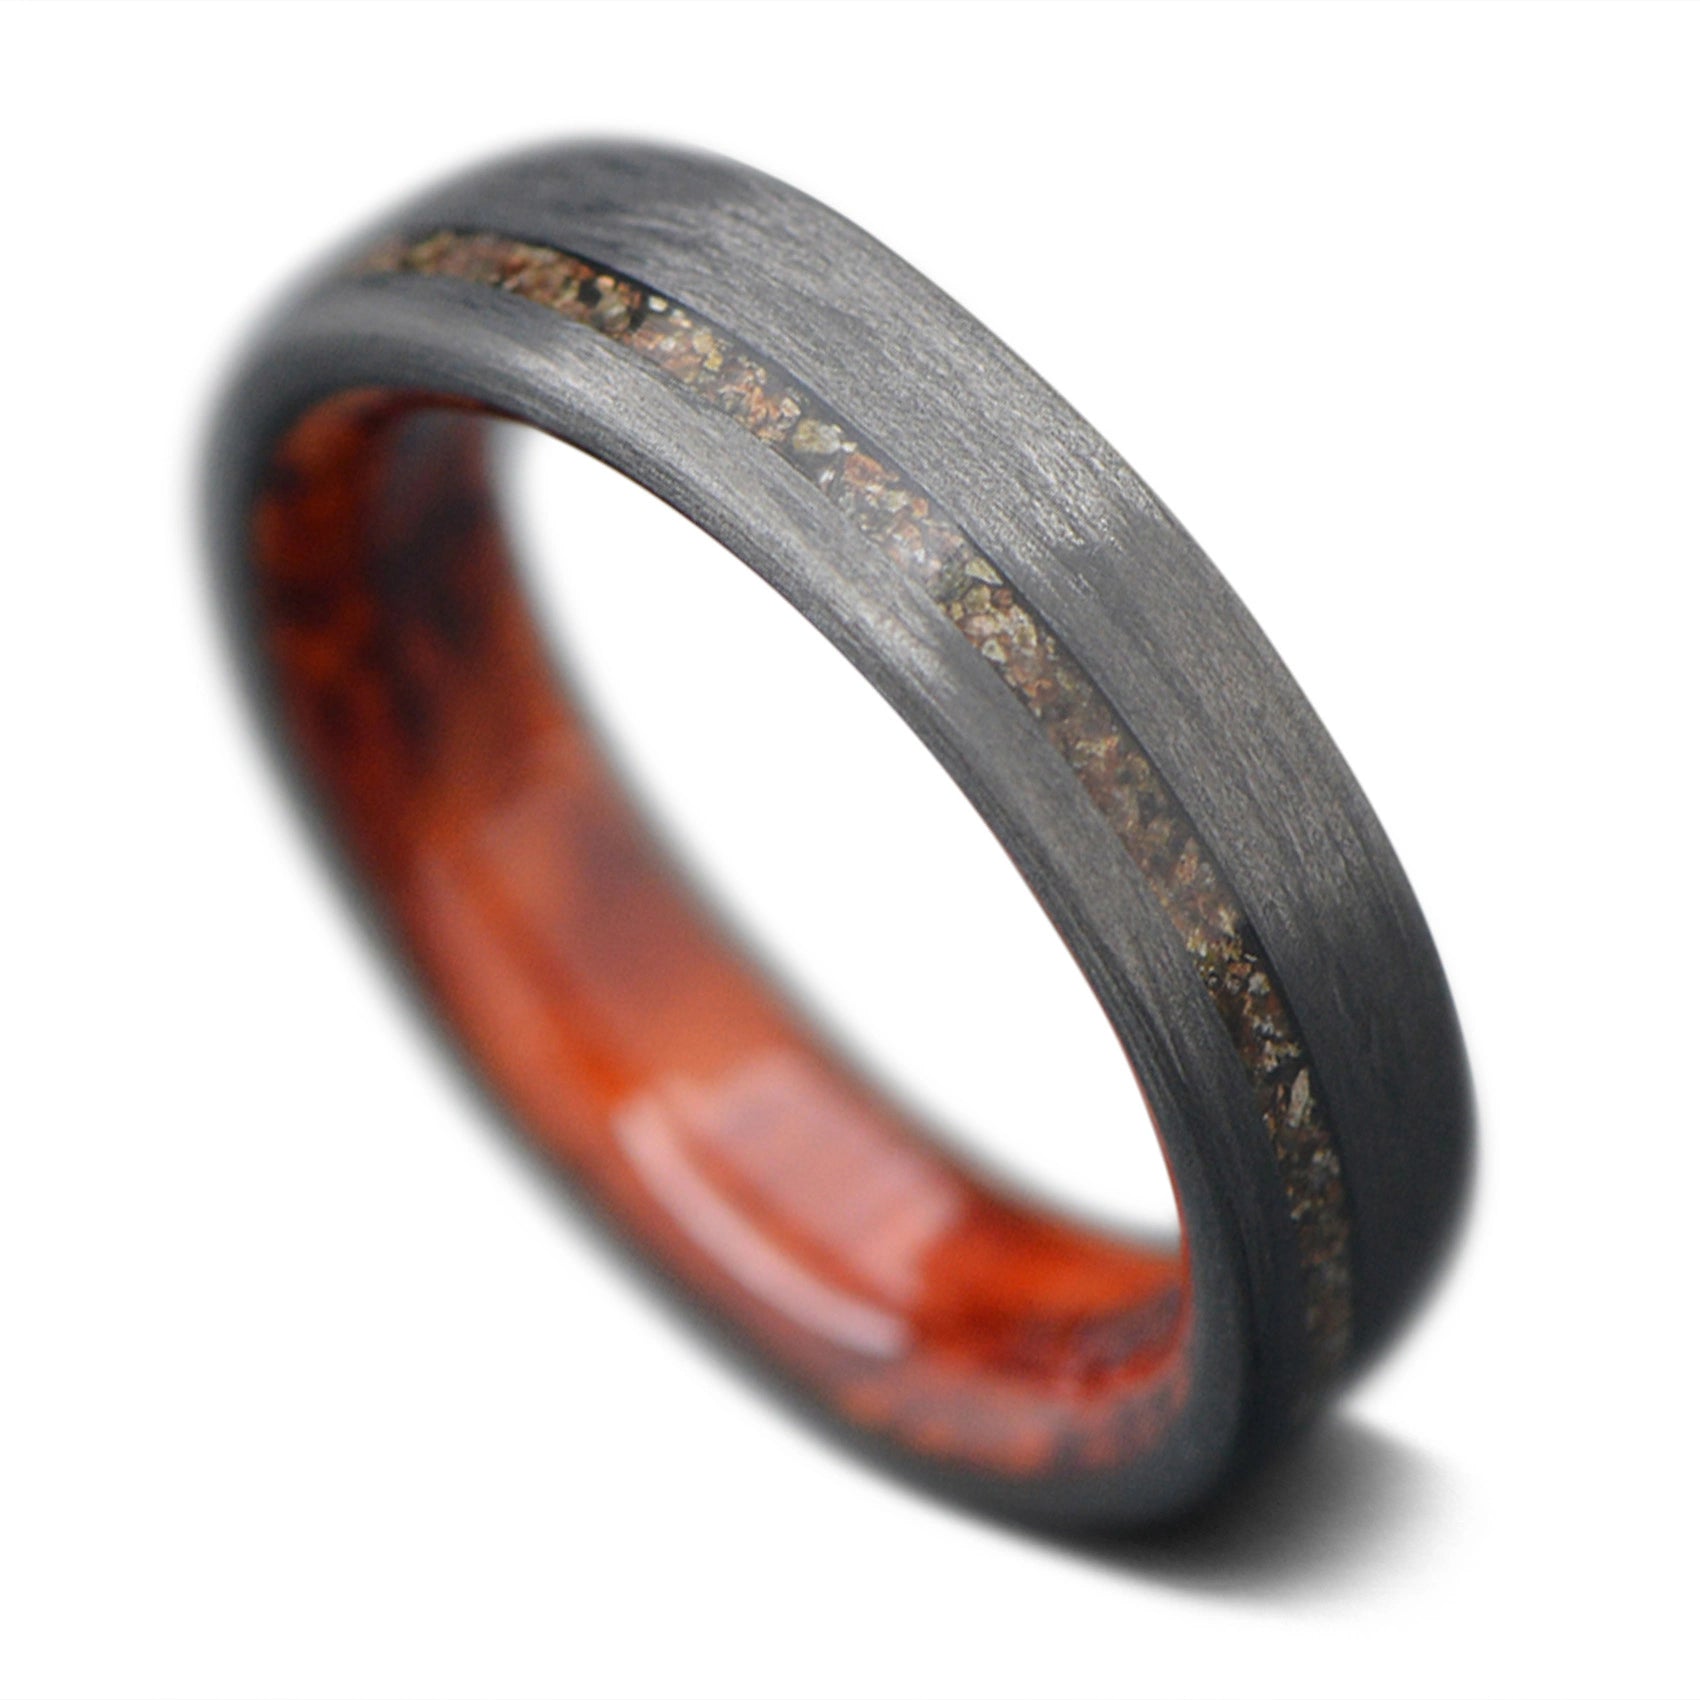 CarbonUni core ring with Crushed T-Rex inlay and  Amboyna inner sleeve, 7mm -THE VERTEX